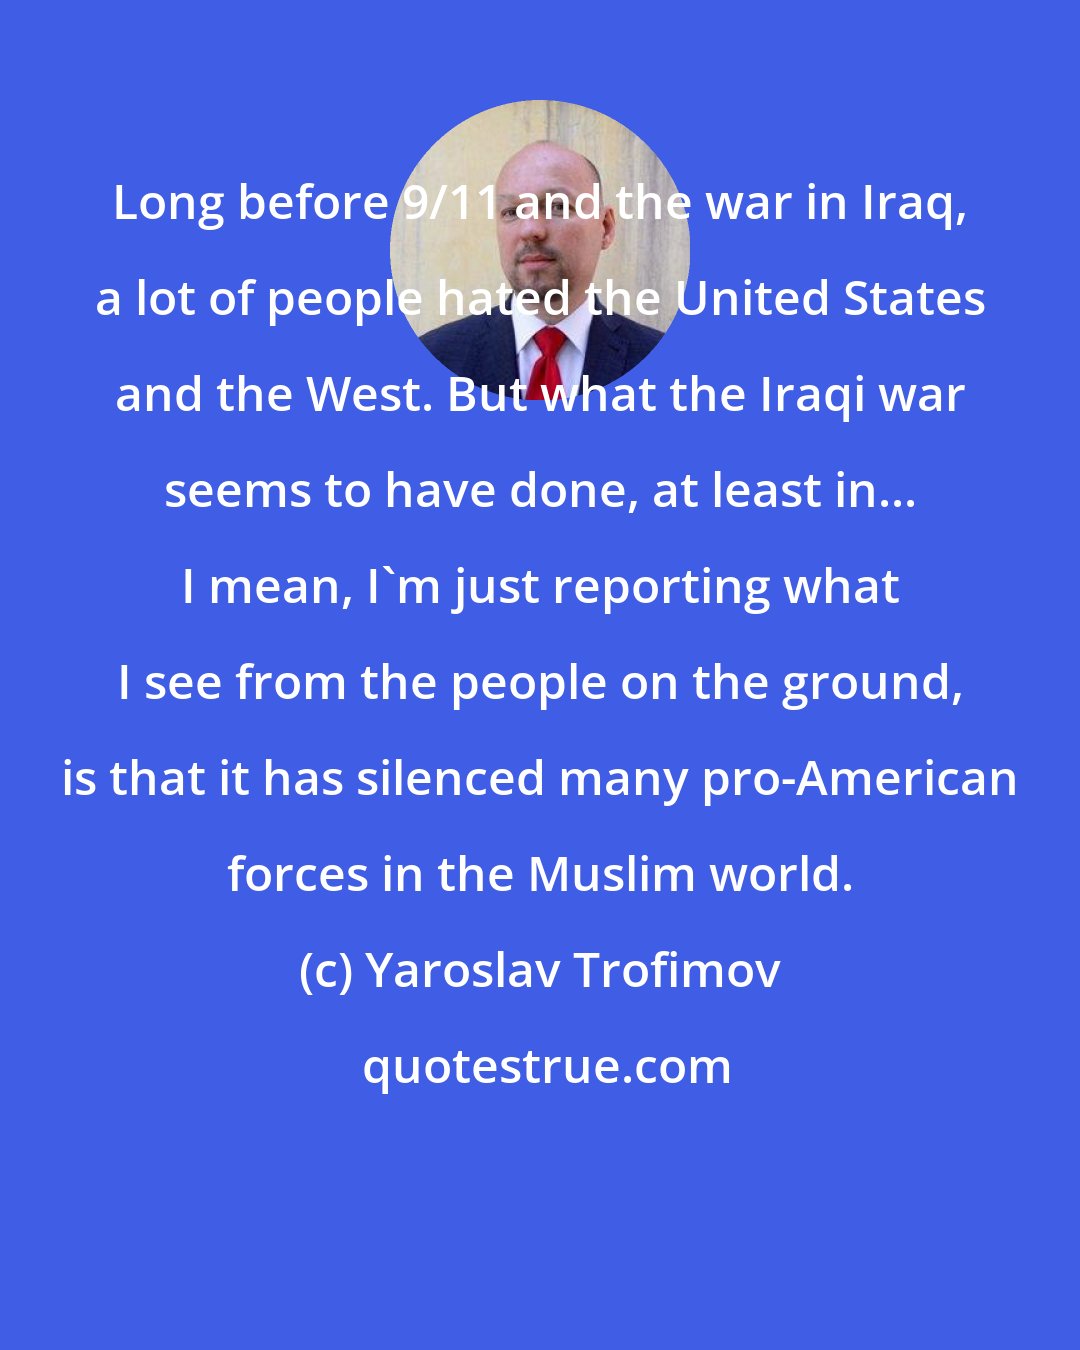 Yaroslav Trofimov: Long before 9/11 and the war in Iraq, a lot of people hated the United States and the West. But what the Iraqi war seems to have done, at least in... I mean, I'm just reporting what I see from the people on the ground, is that it has silenced many pro-American forces in the Muslim world.